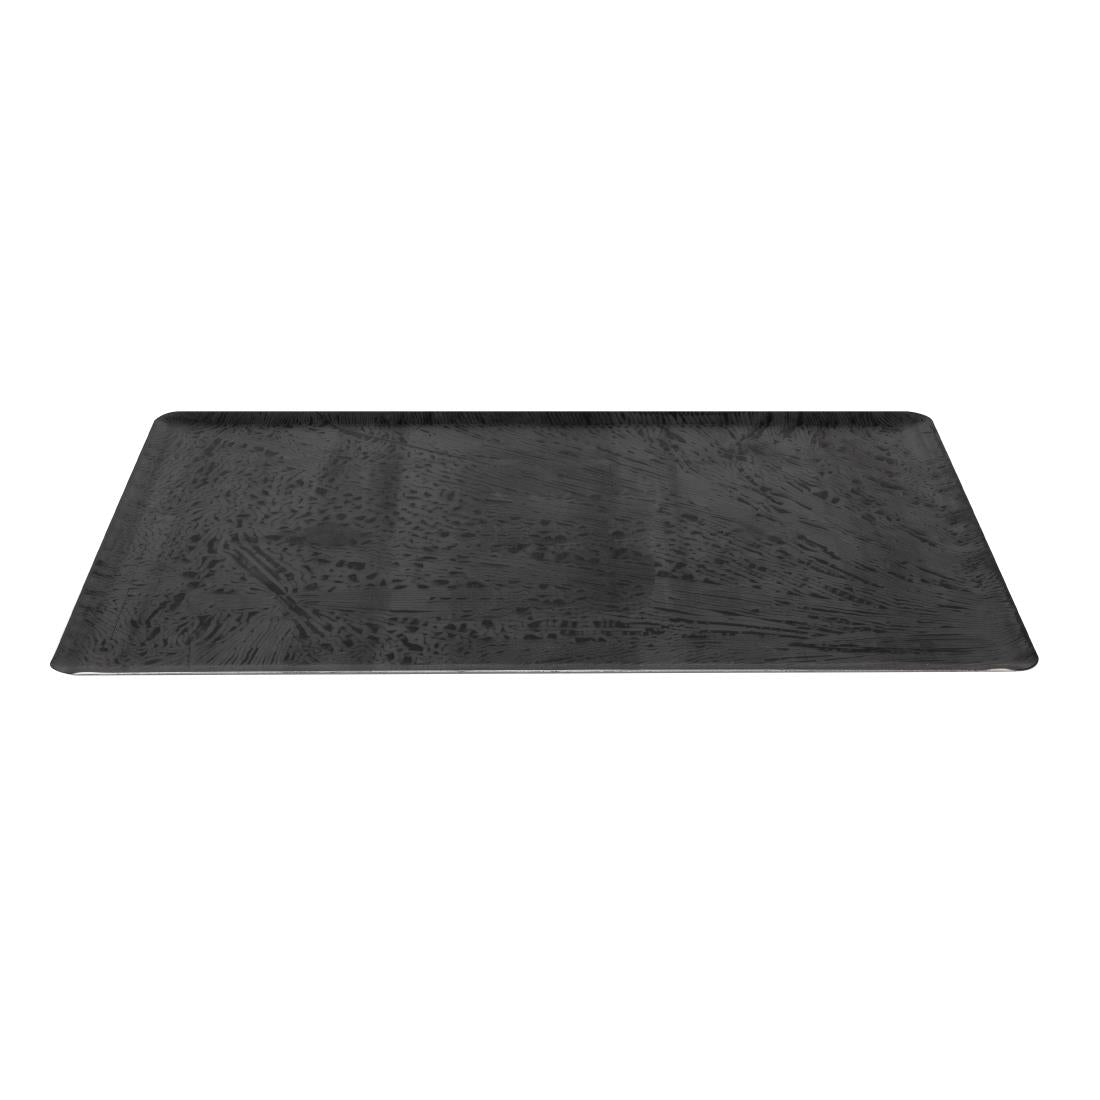 Bourgeat Blued Steel Baking Tray 600 x 400mm JD Catering Equipment Solutions Ltd